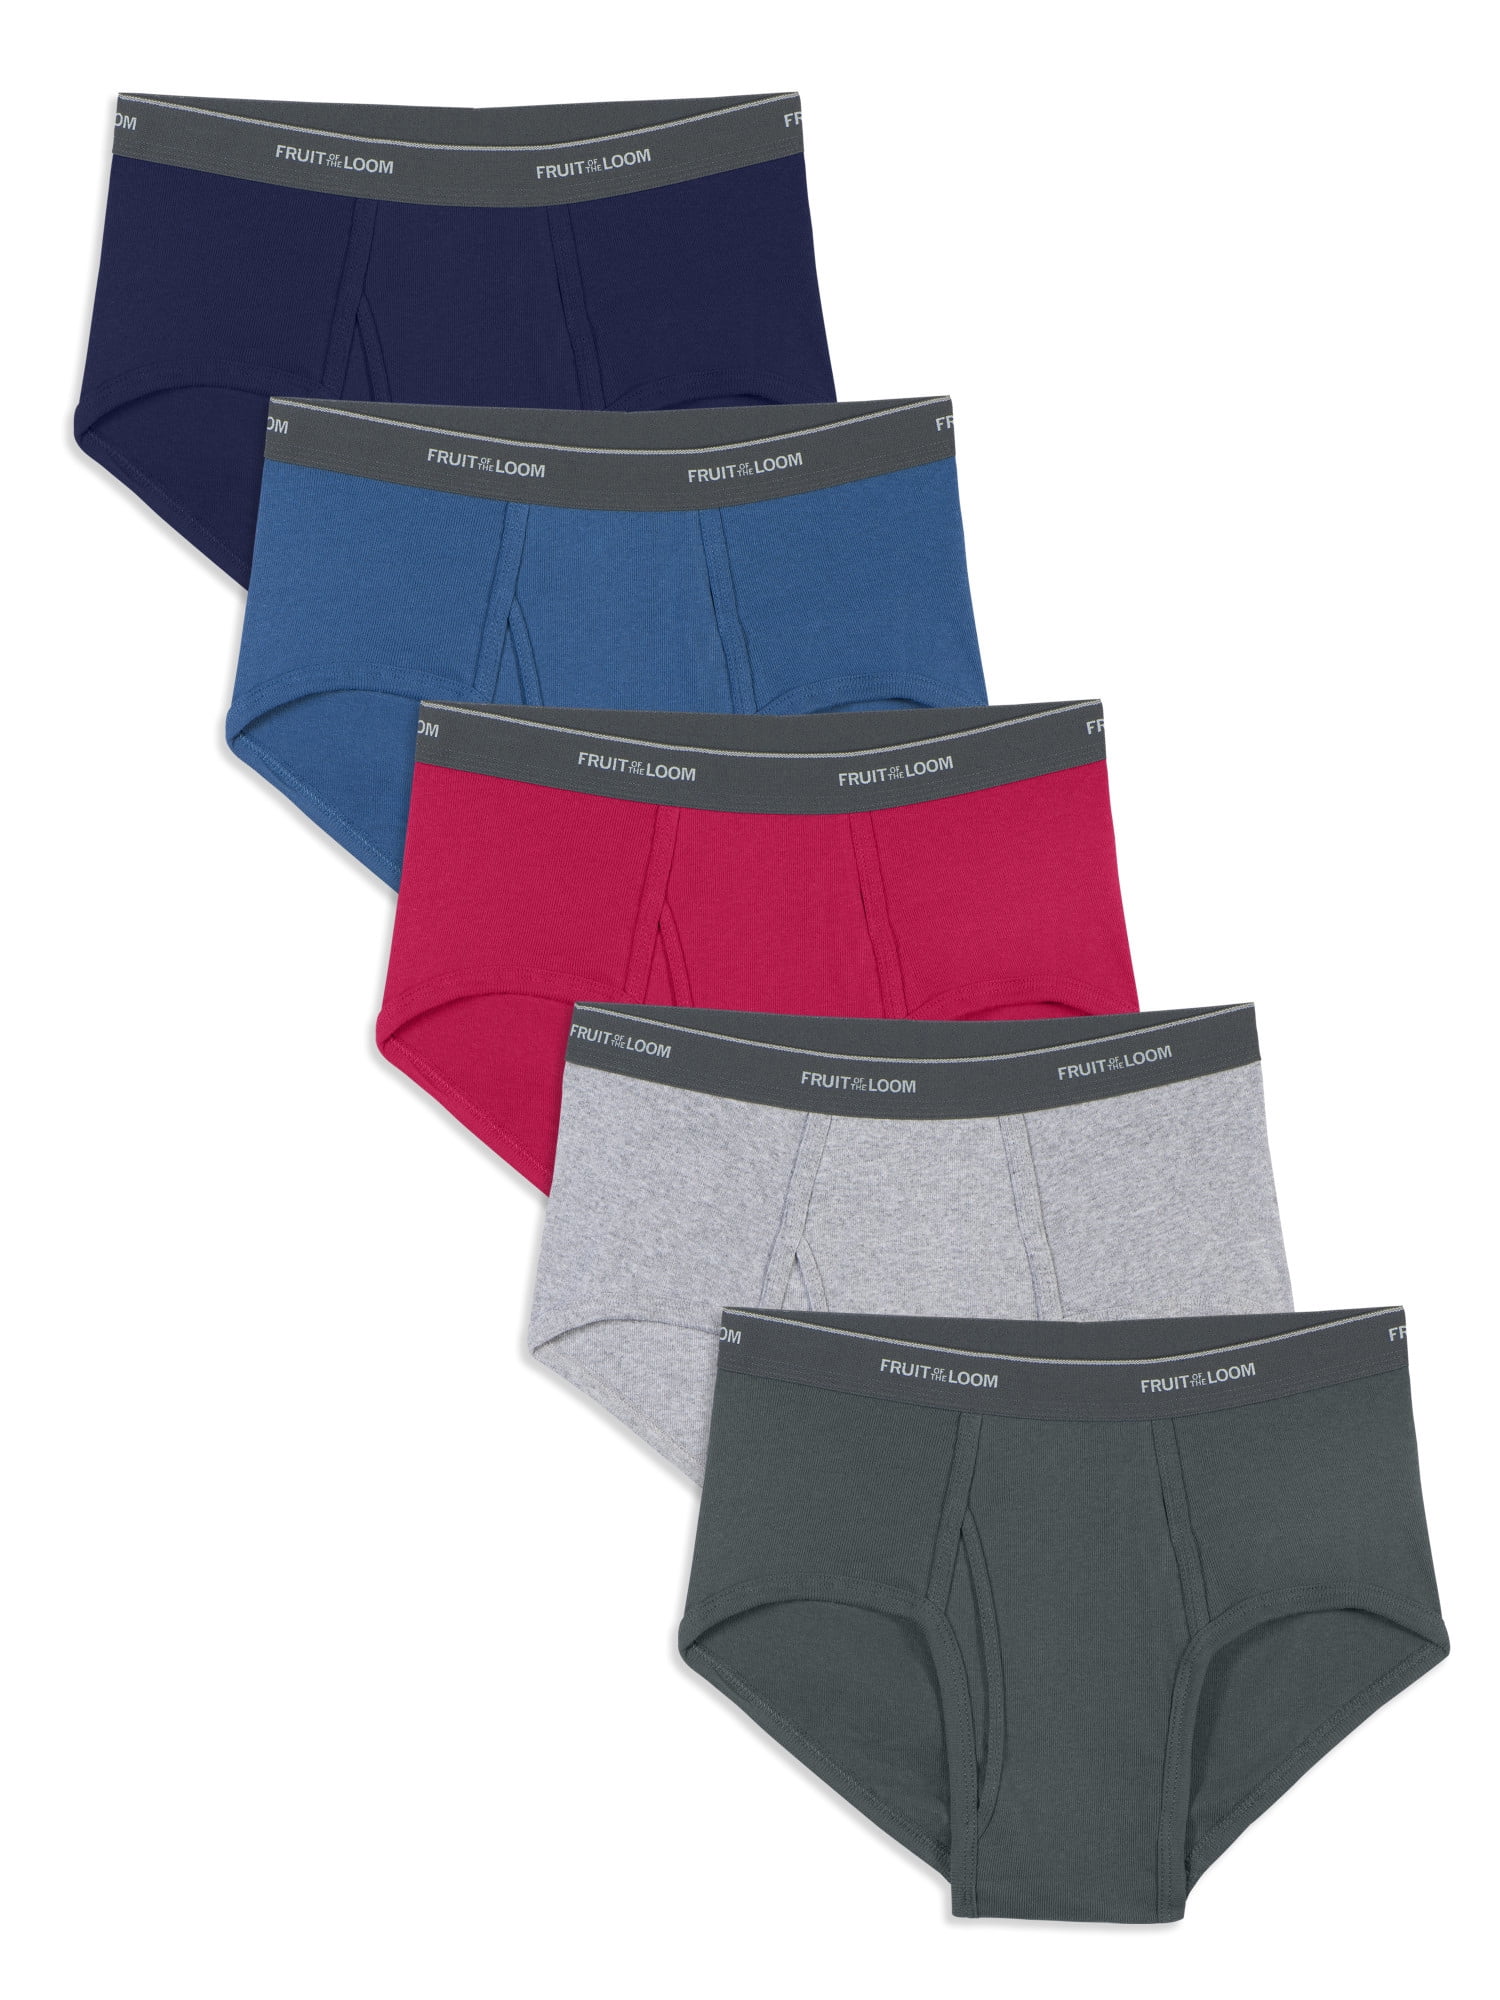 Fruit of the Loom Men's Assorted Fashion Briefs, Extended Sizes, 5 Pack 